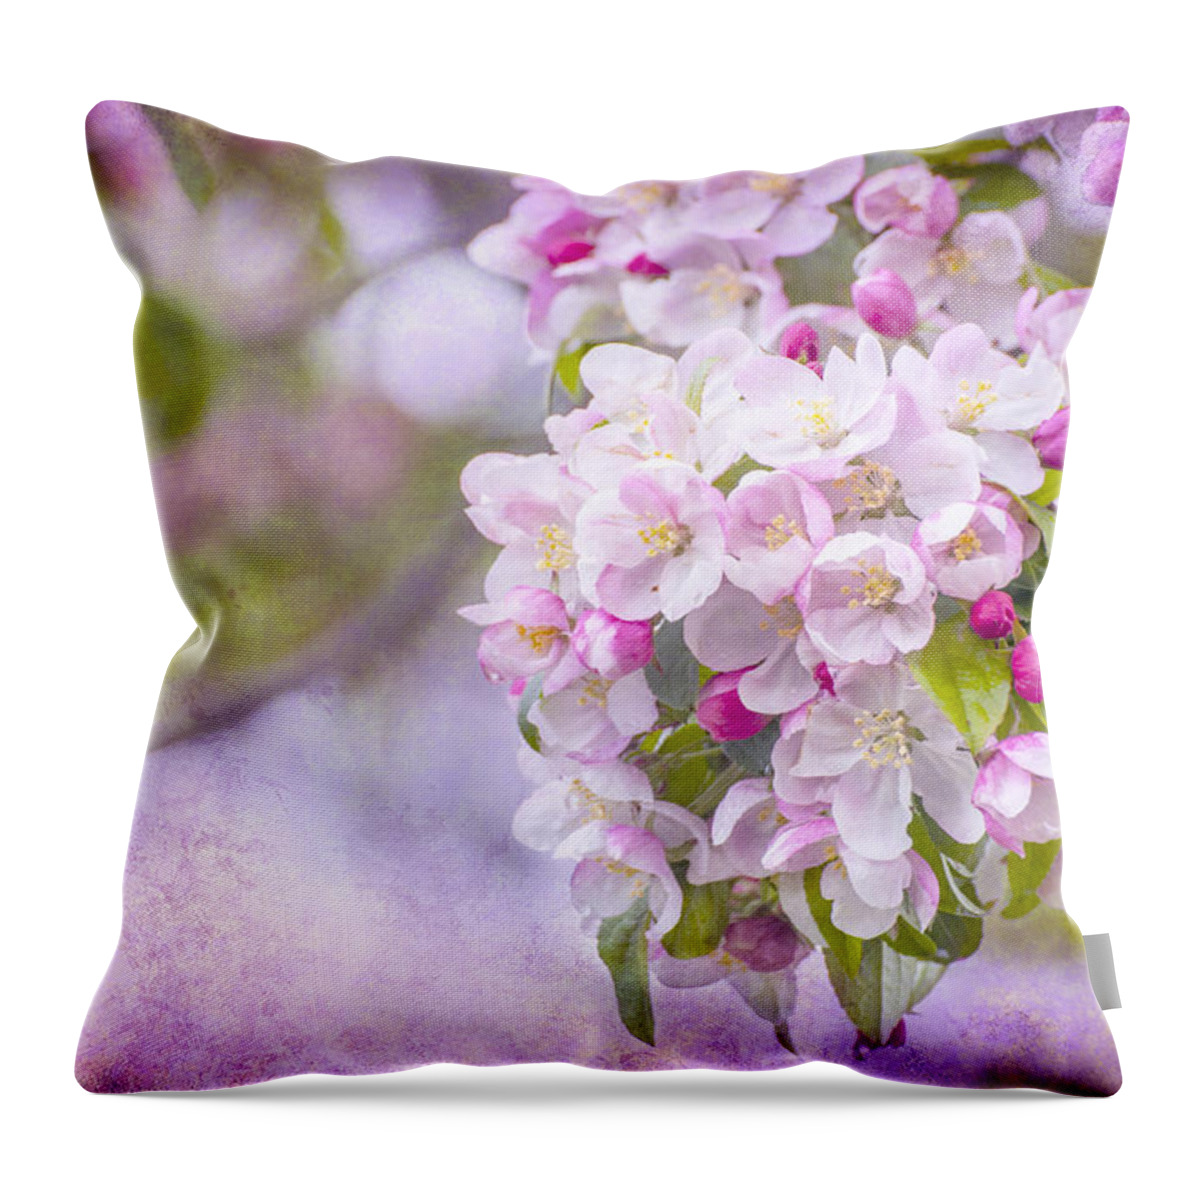 Pink Throw Pillow featuring the photograph Spring Blossoms by Cathy Kovarik